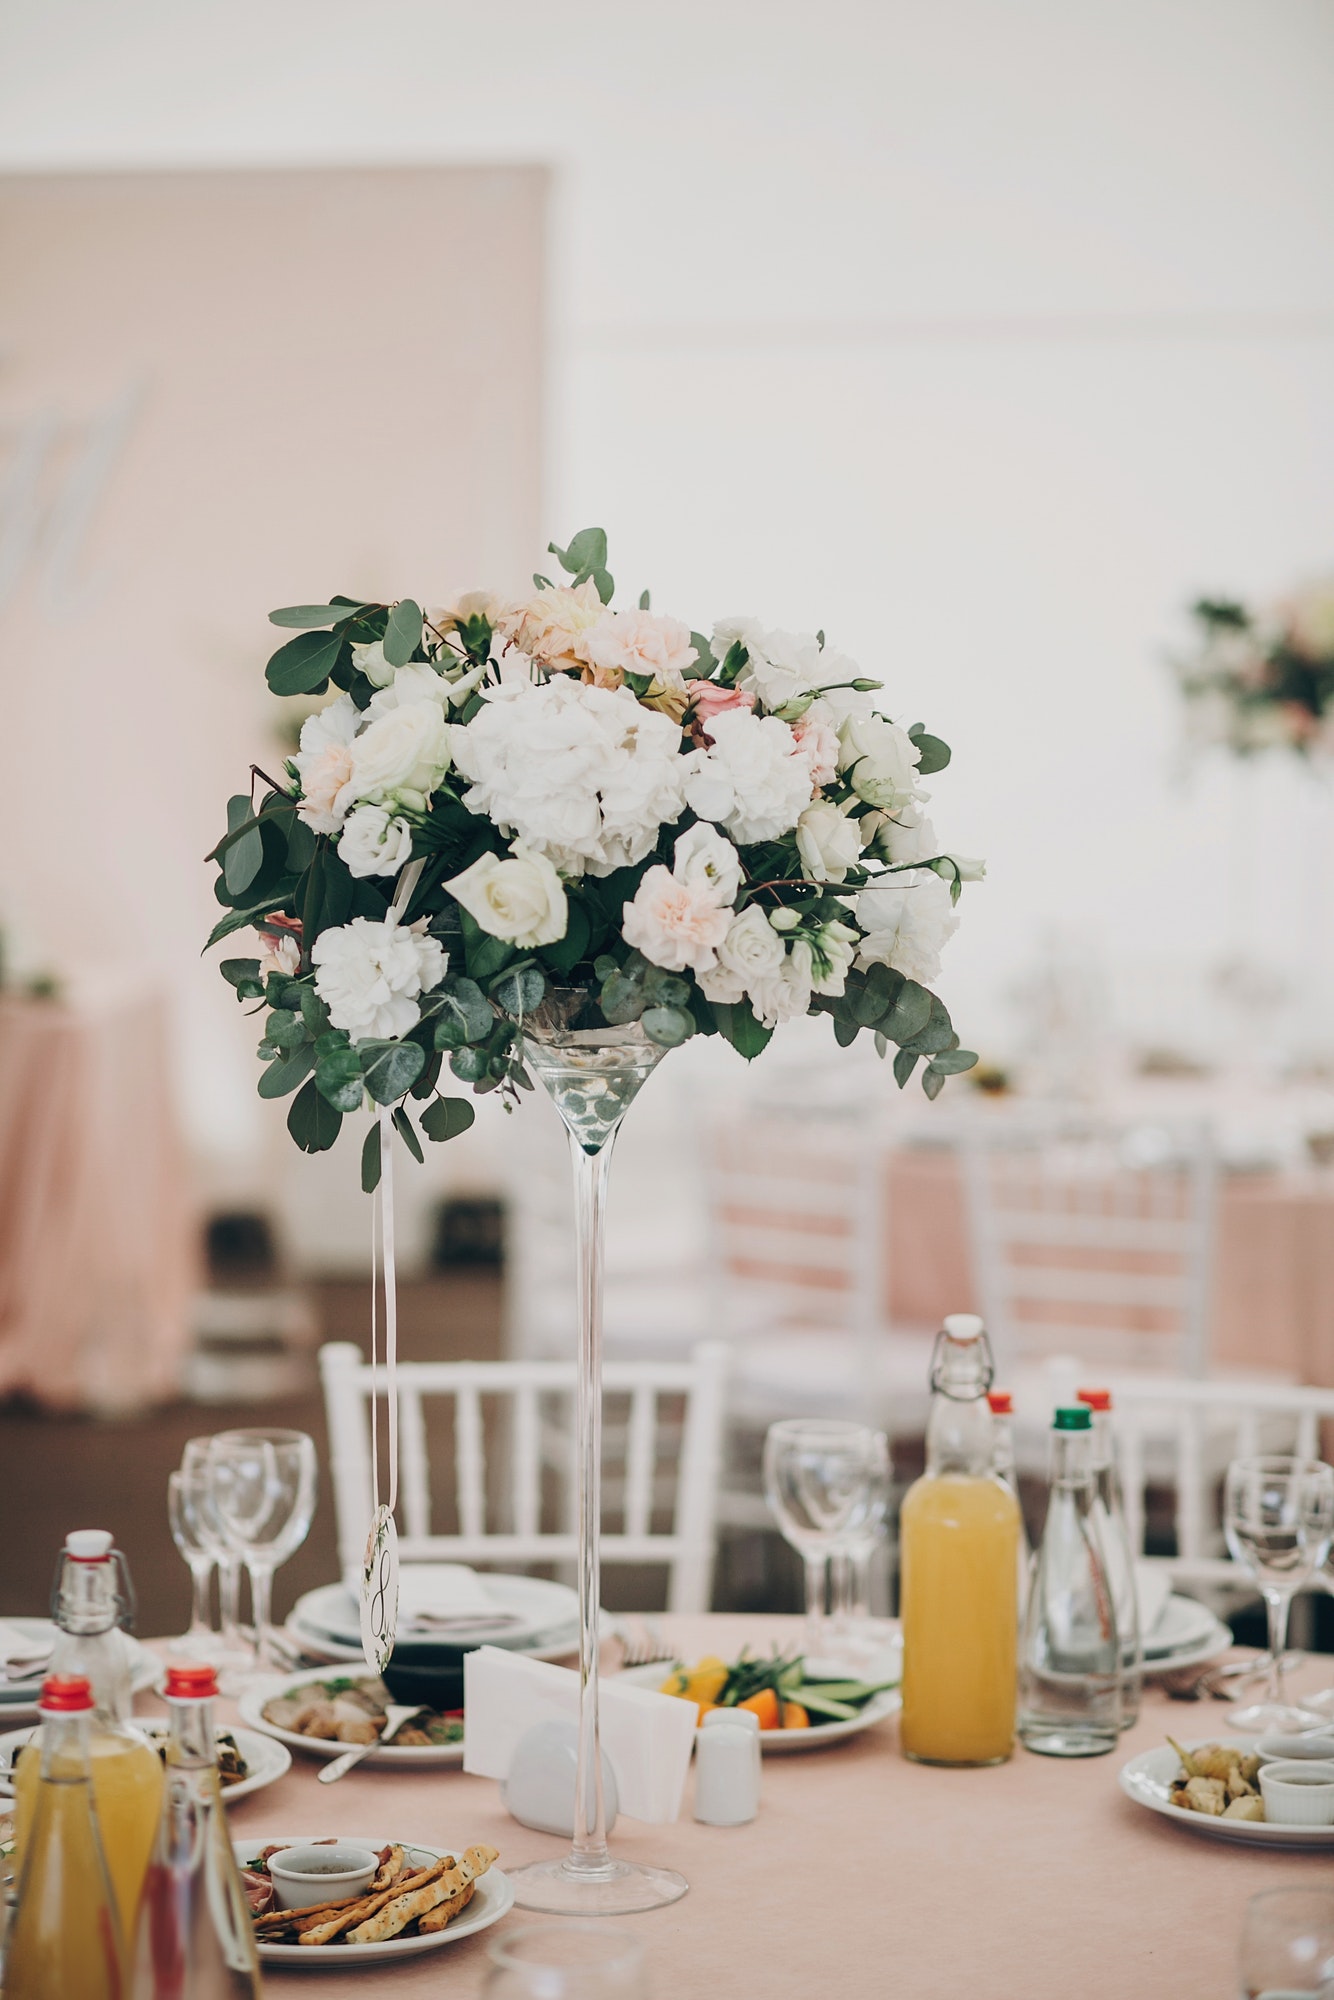 Wedding setting, tender pink table with glasses, cutlery, napkin and delicious food and drinks